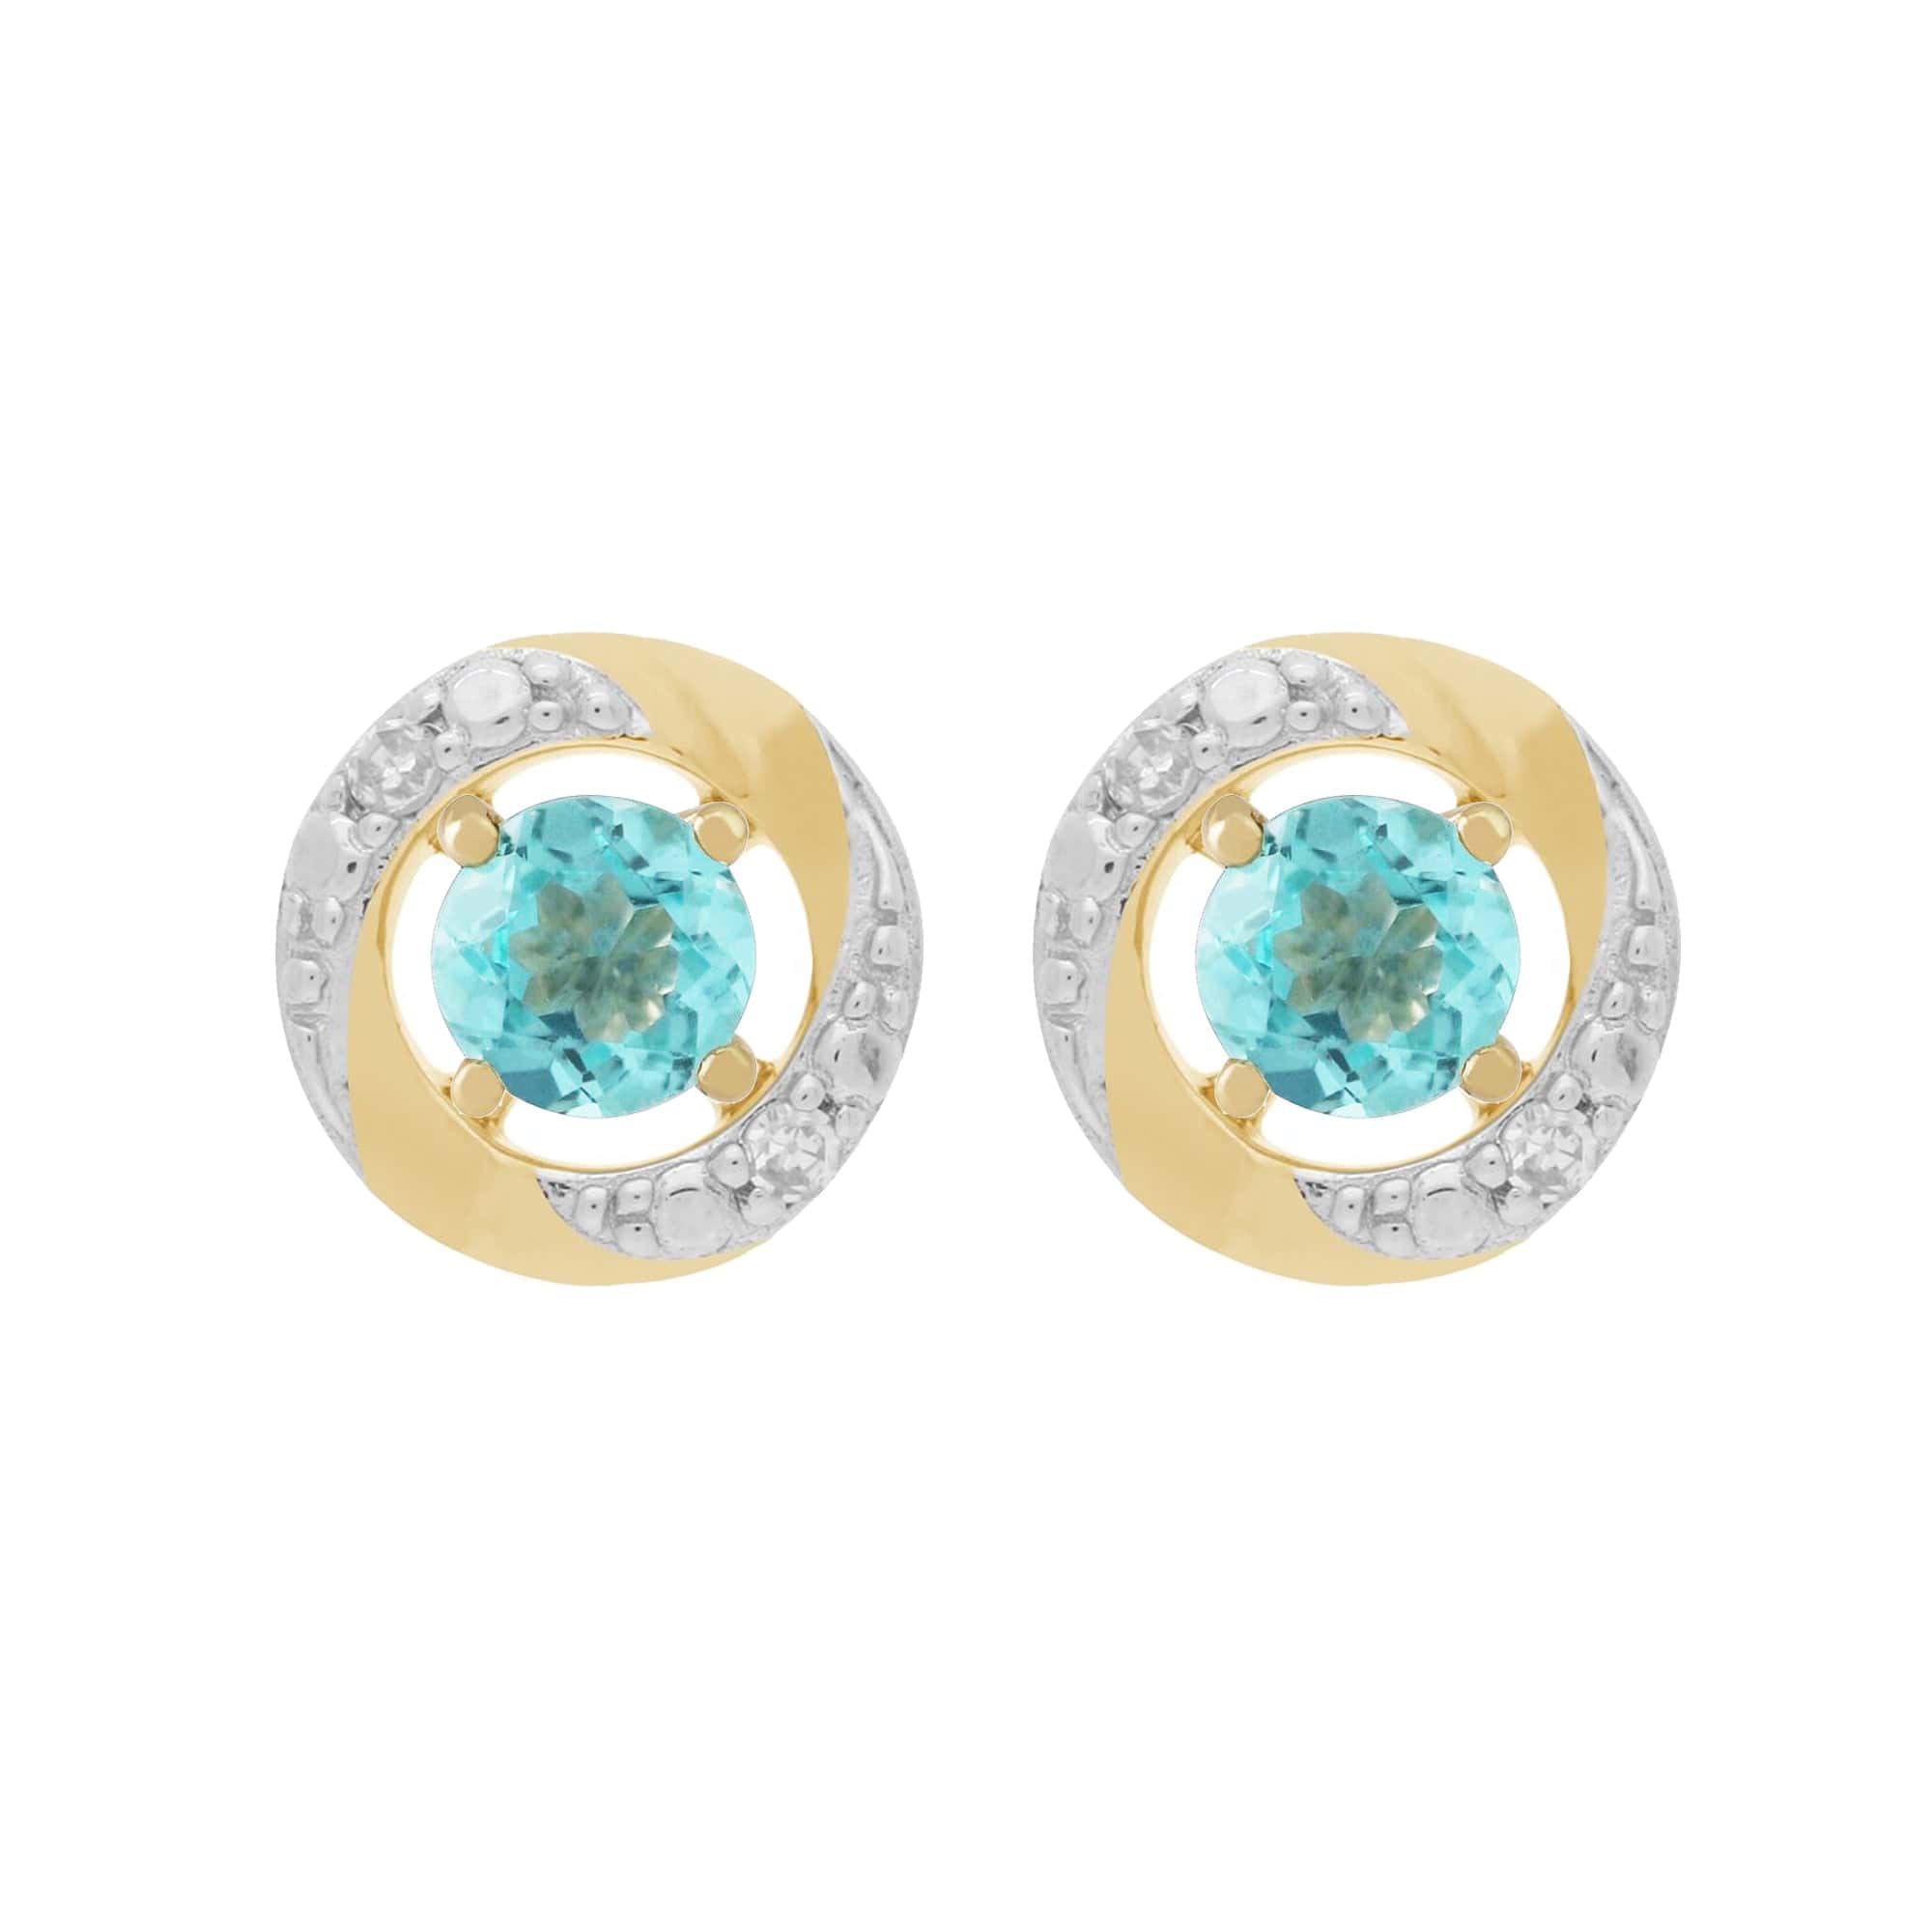 183E0083439-191E0374019 Classic Round Apatite Stud Earrings with Detachable Diamond Halo Ear Jacket in 9ct Yellow Gold 1